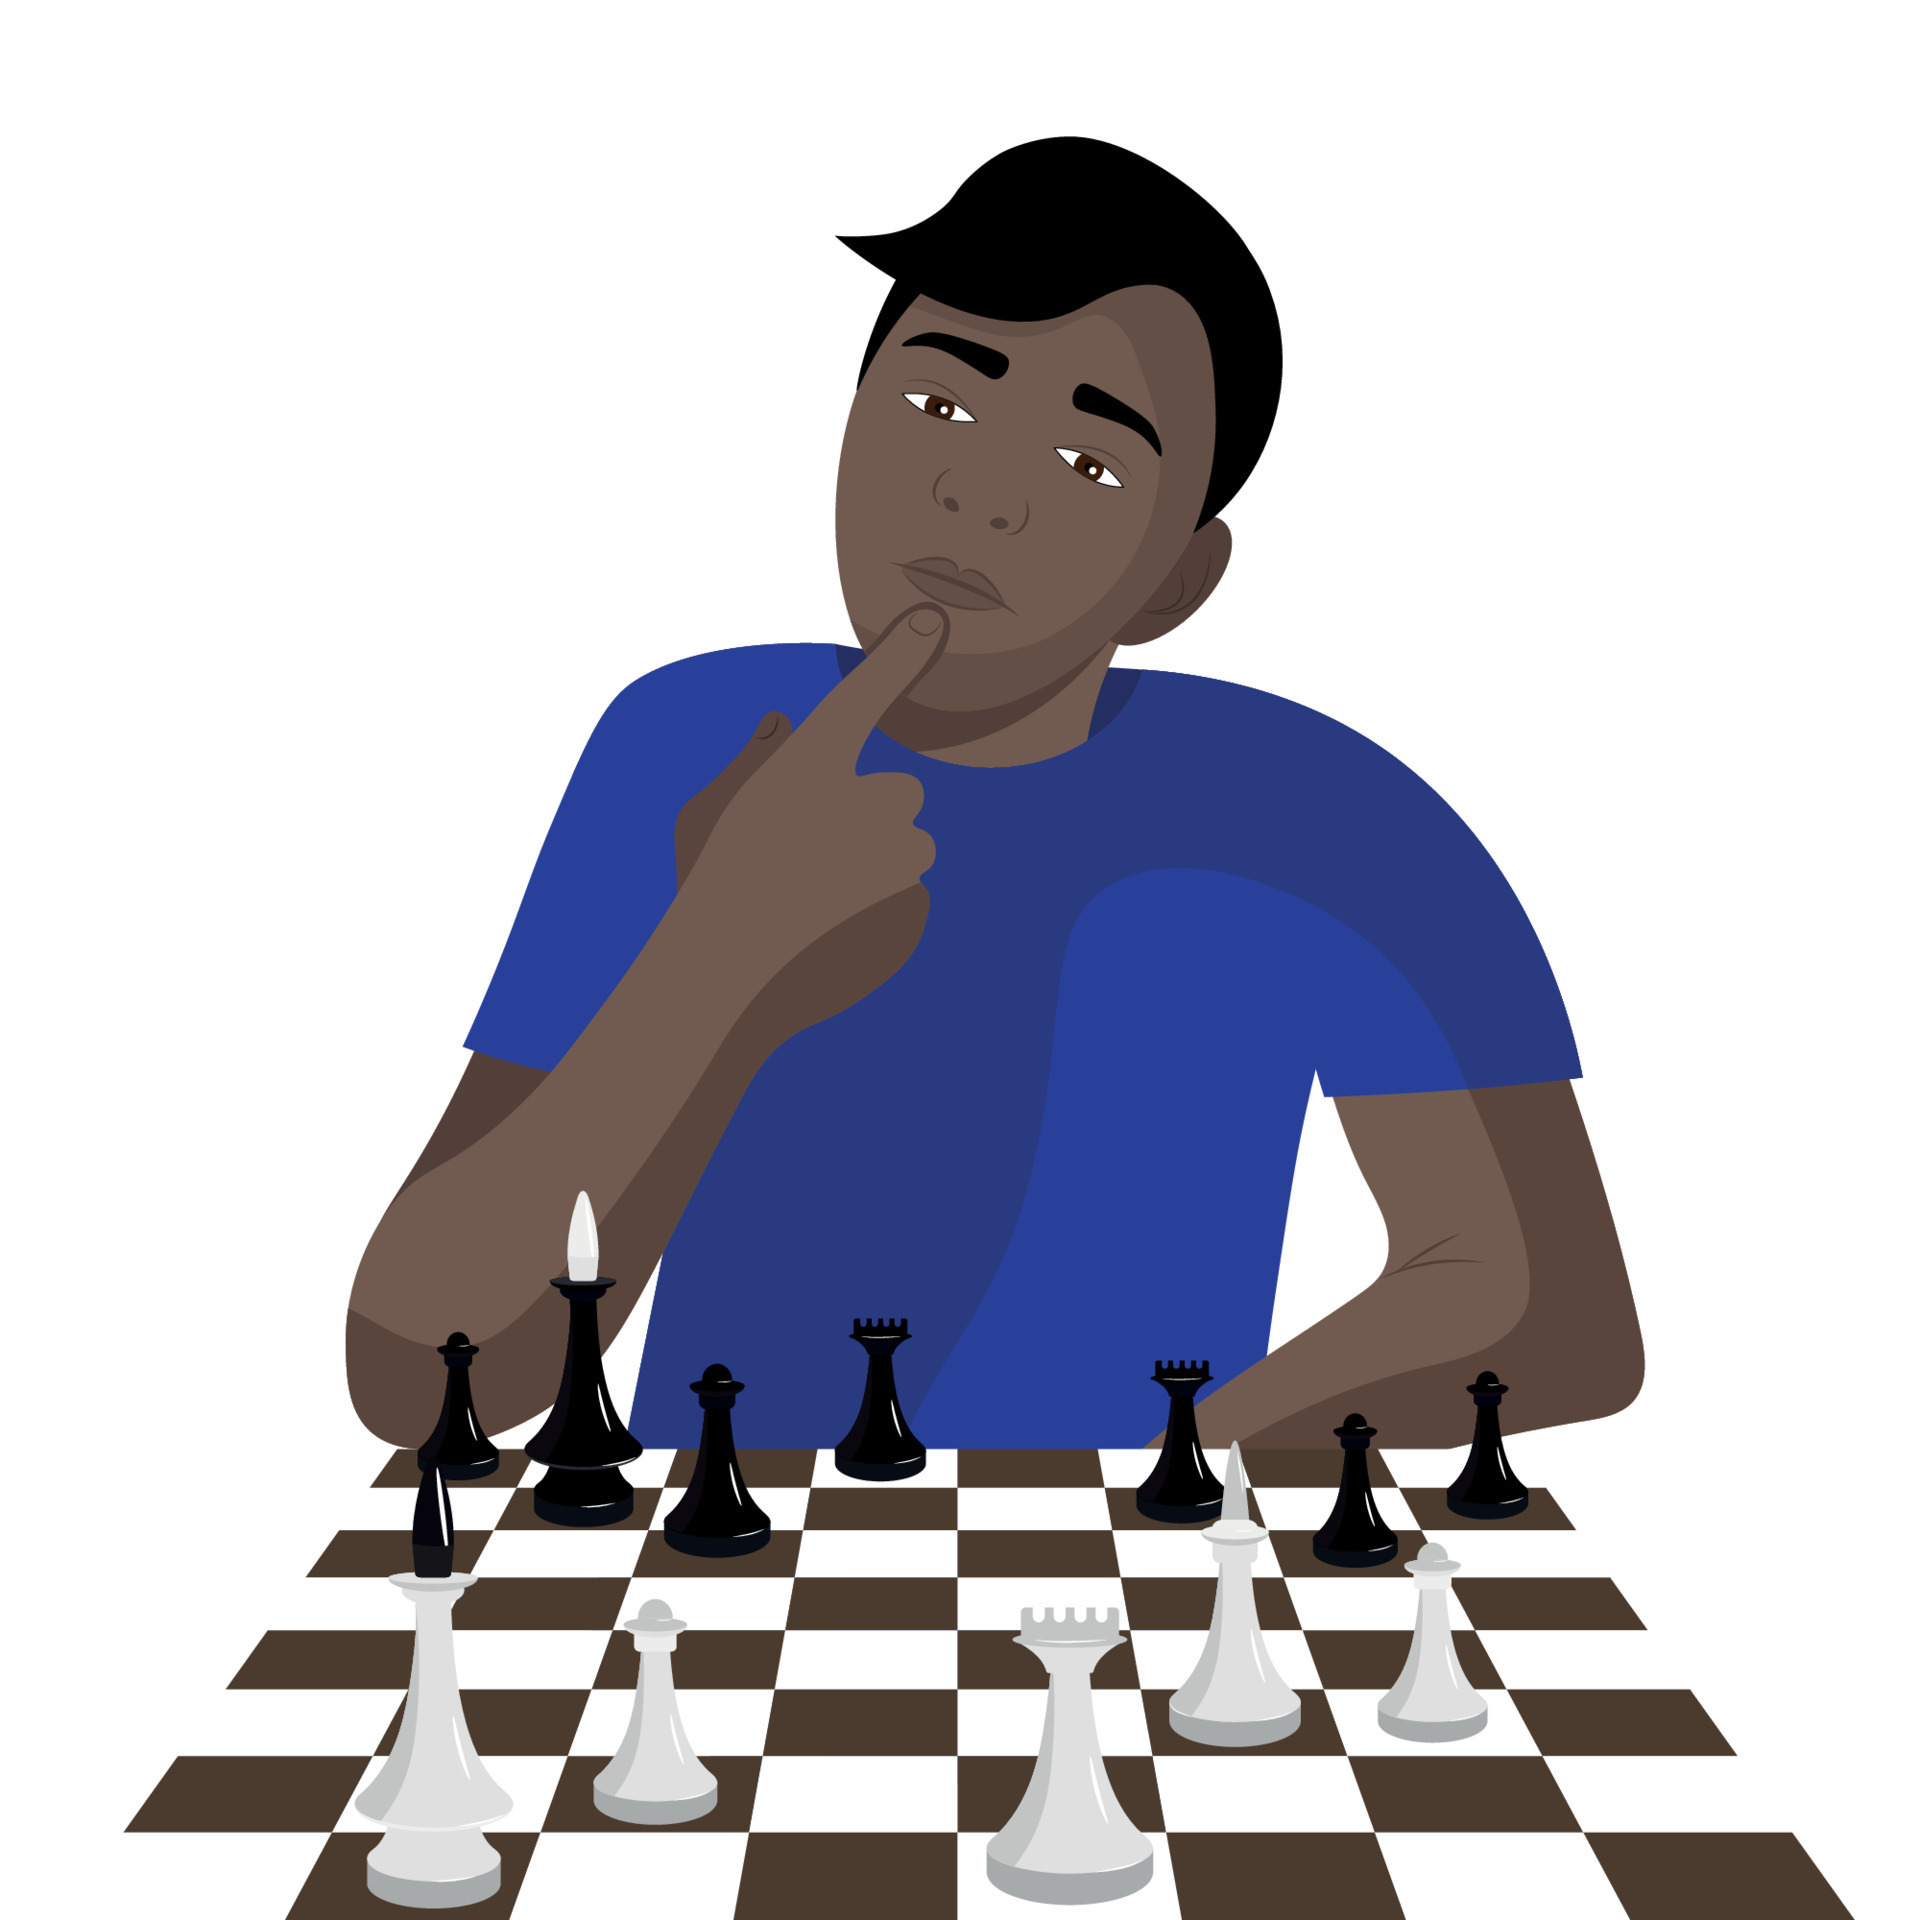 Cute cartoon drawing chess board with figures in flat style